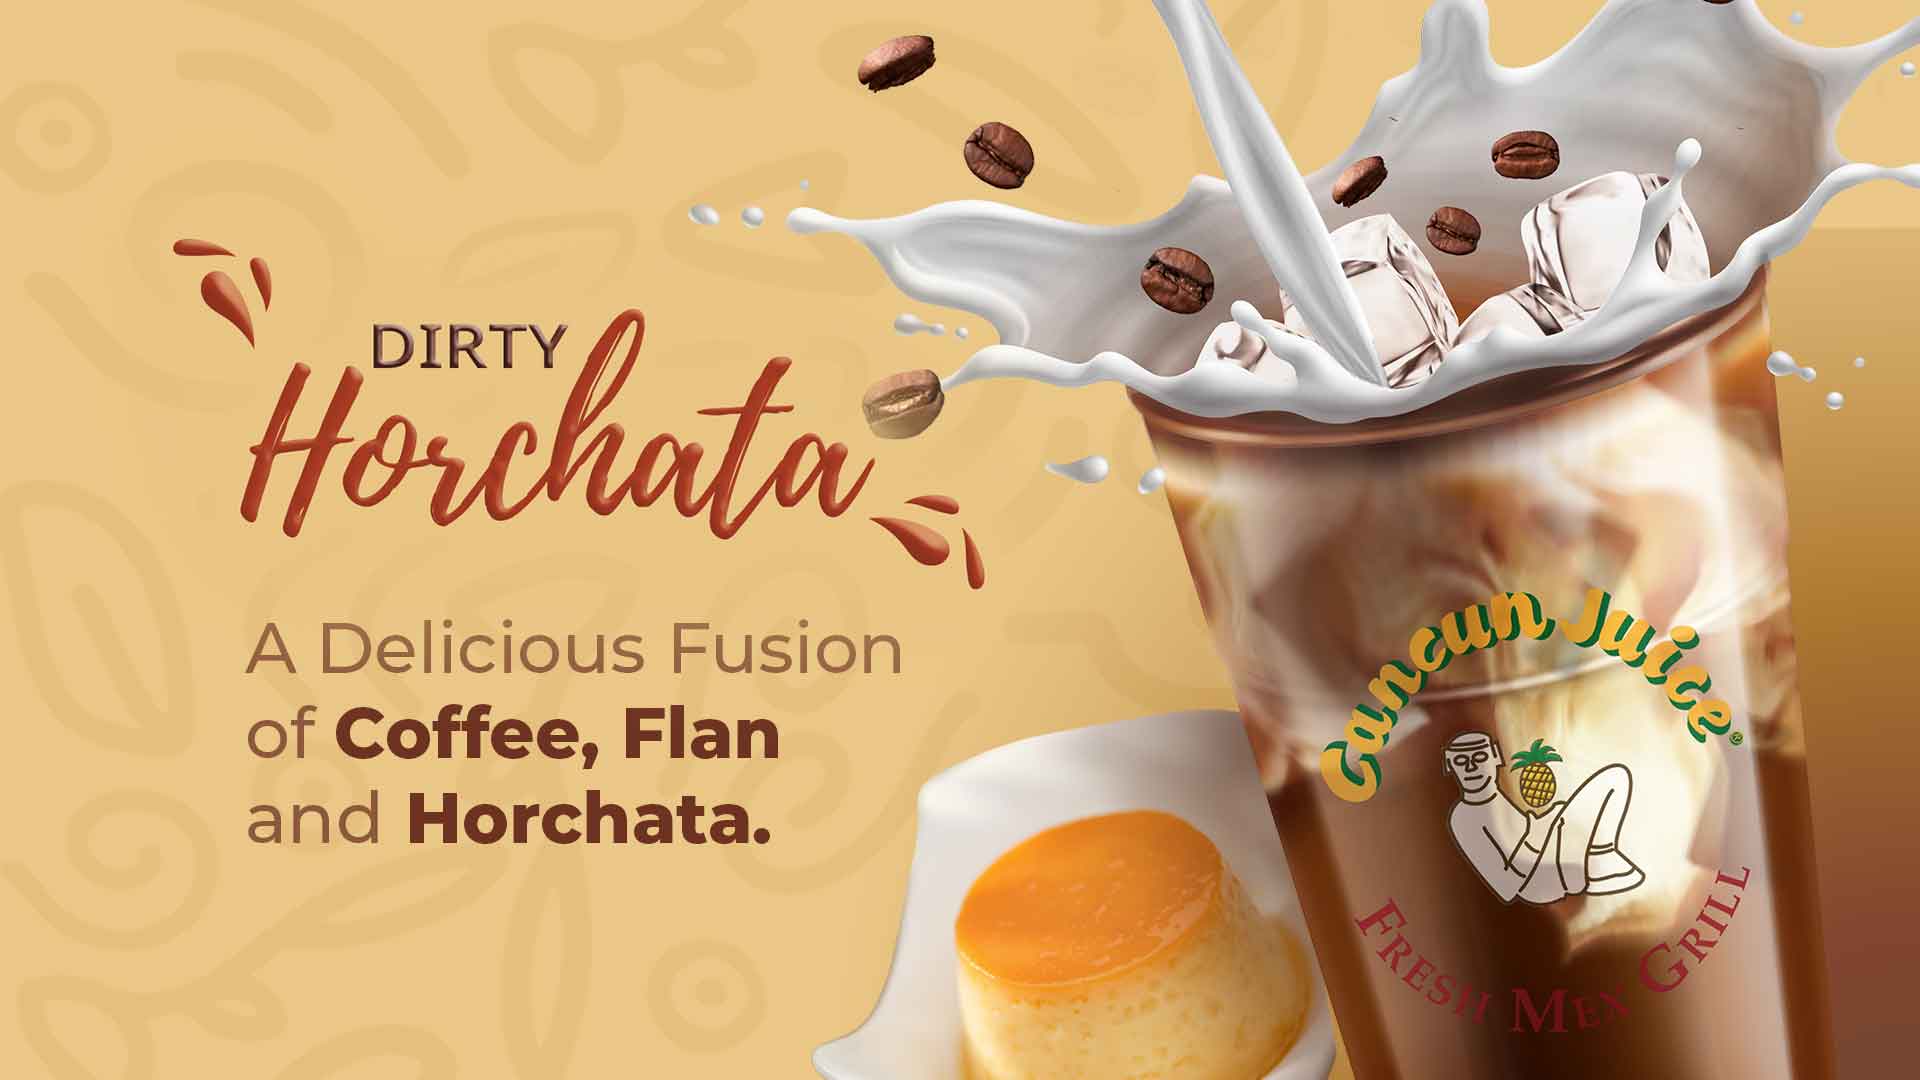 Dirty Horchata, A Fusion of Coffee, Flan and Horchata.